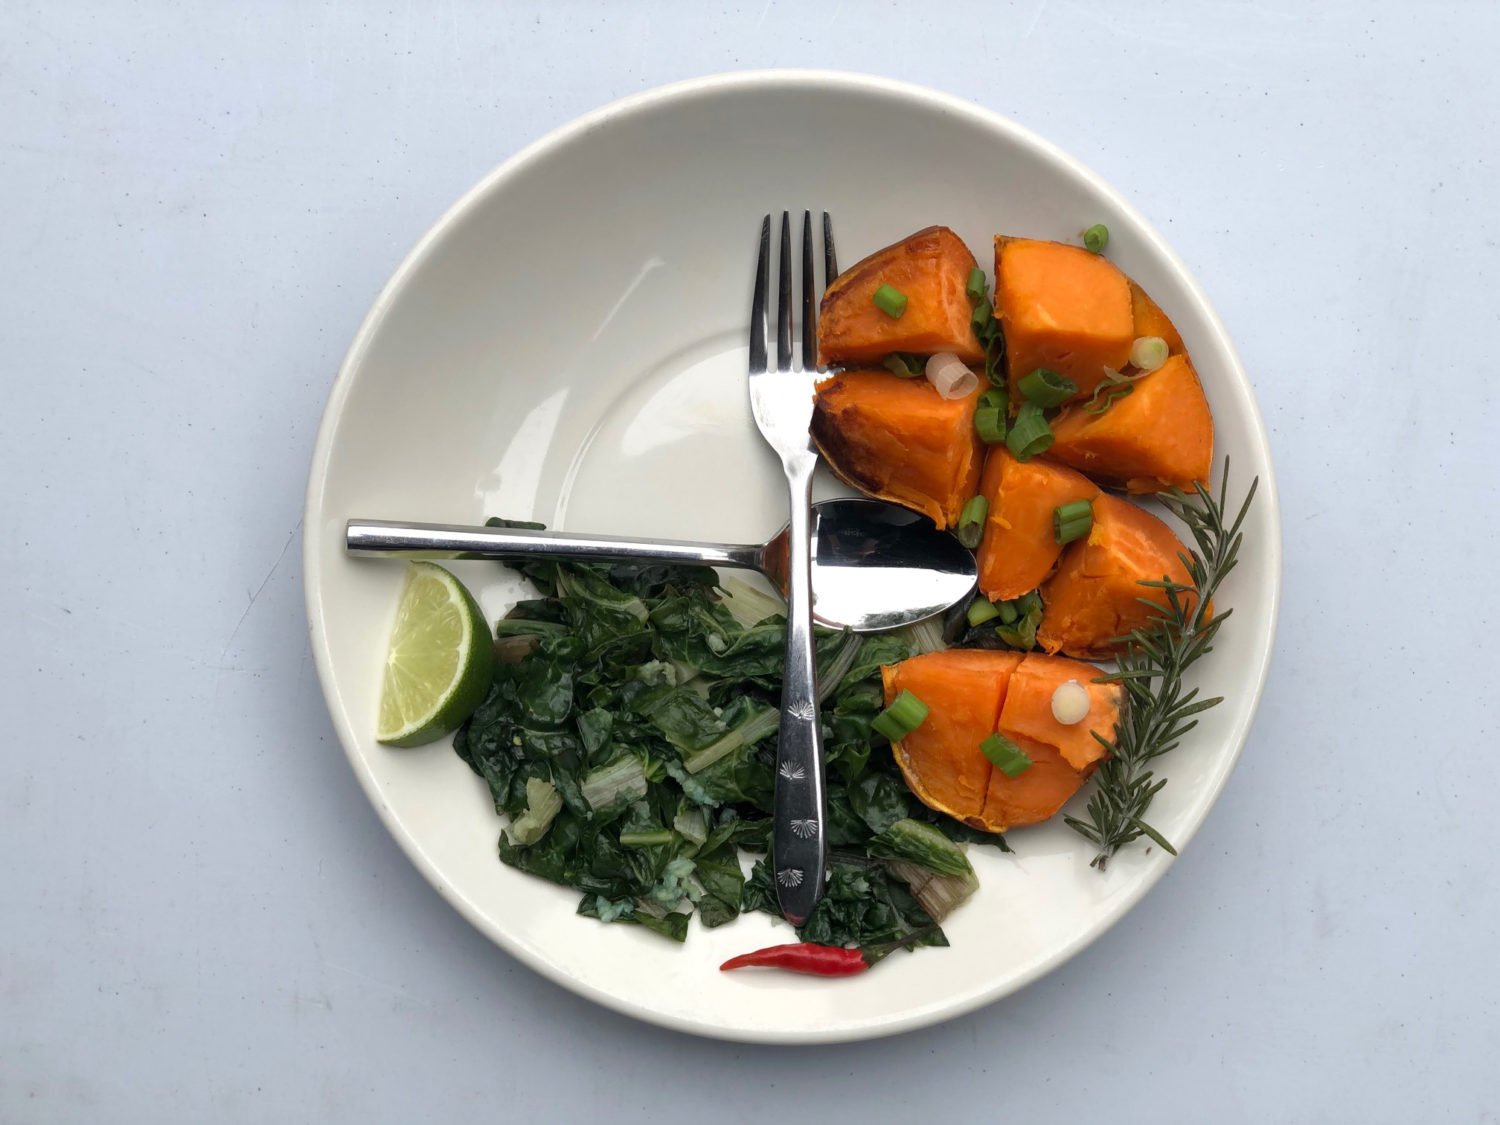 A Vivacity Acupuncture photograph showing a white plate with three-quarters filled with sweet potatoes, greens and herbs.